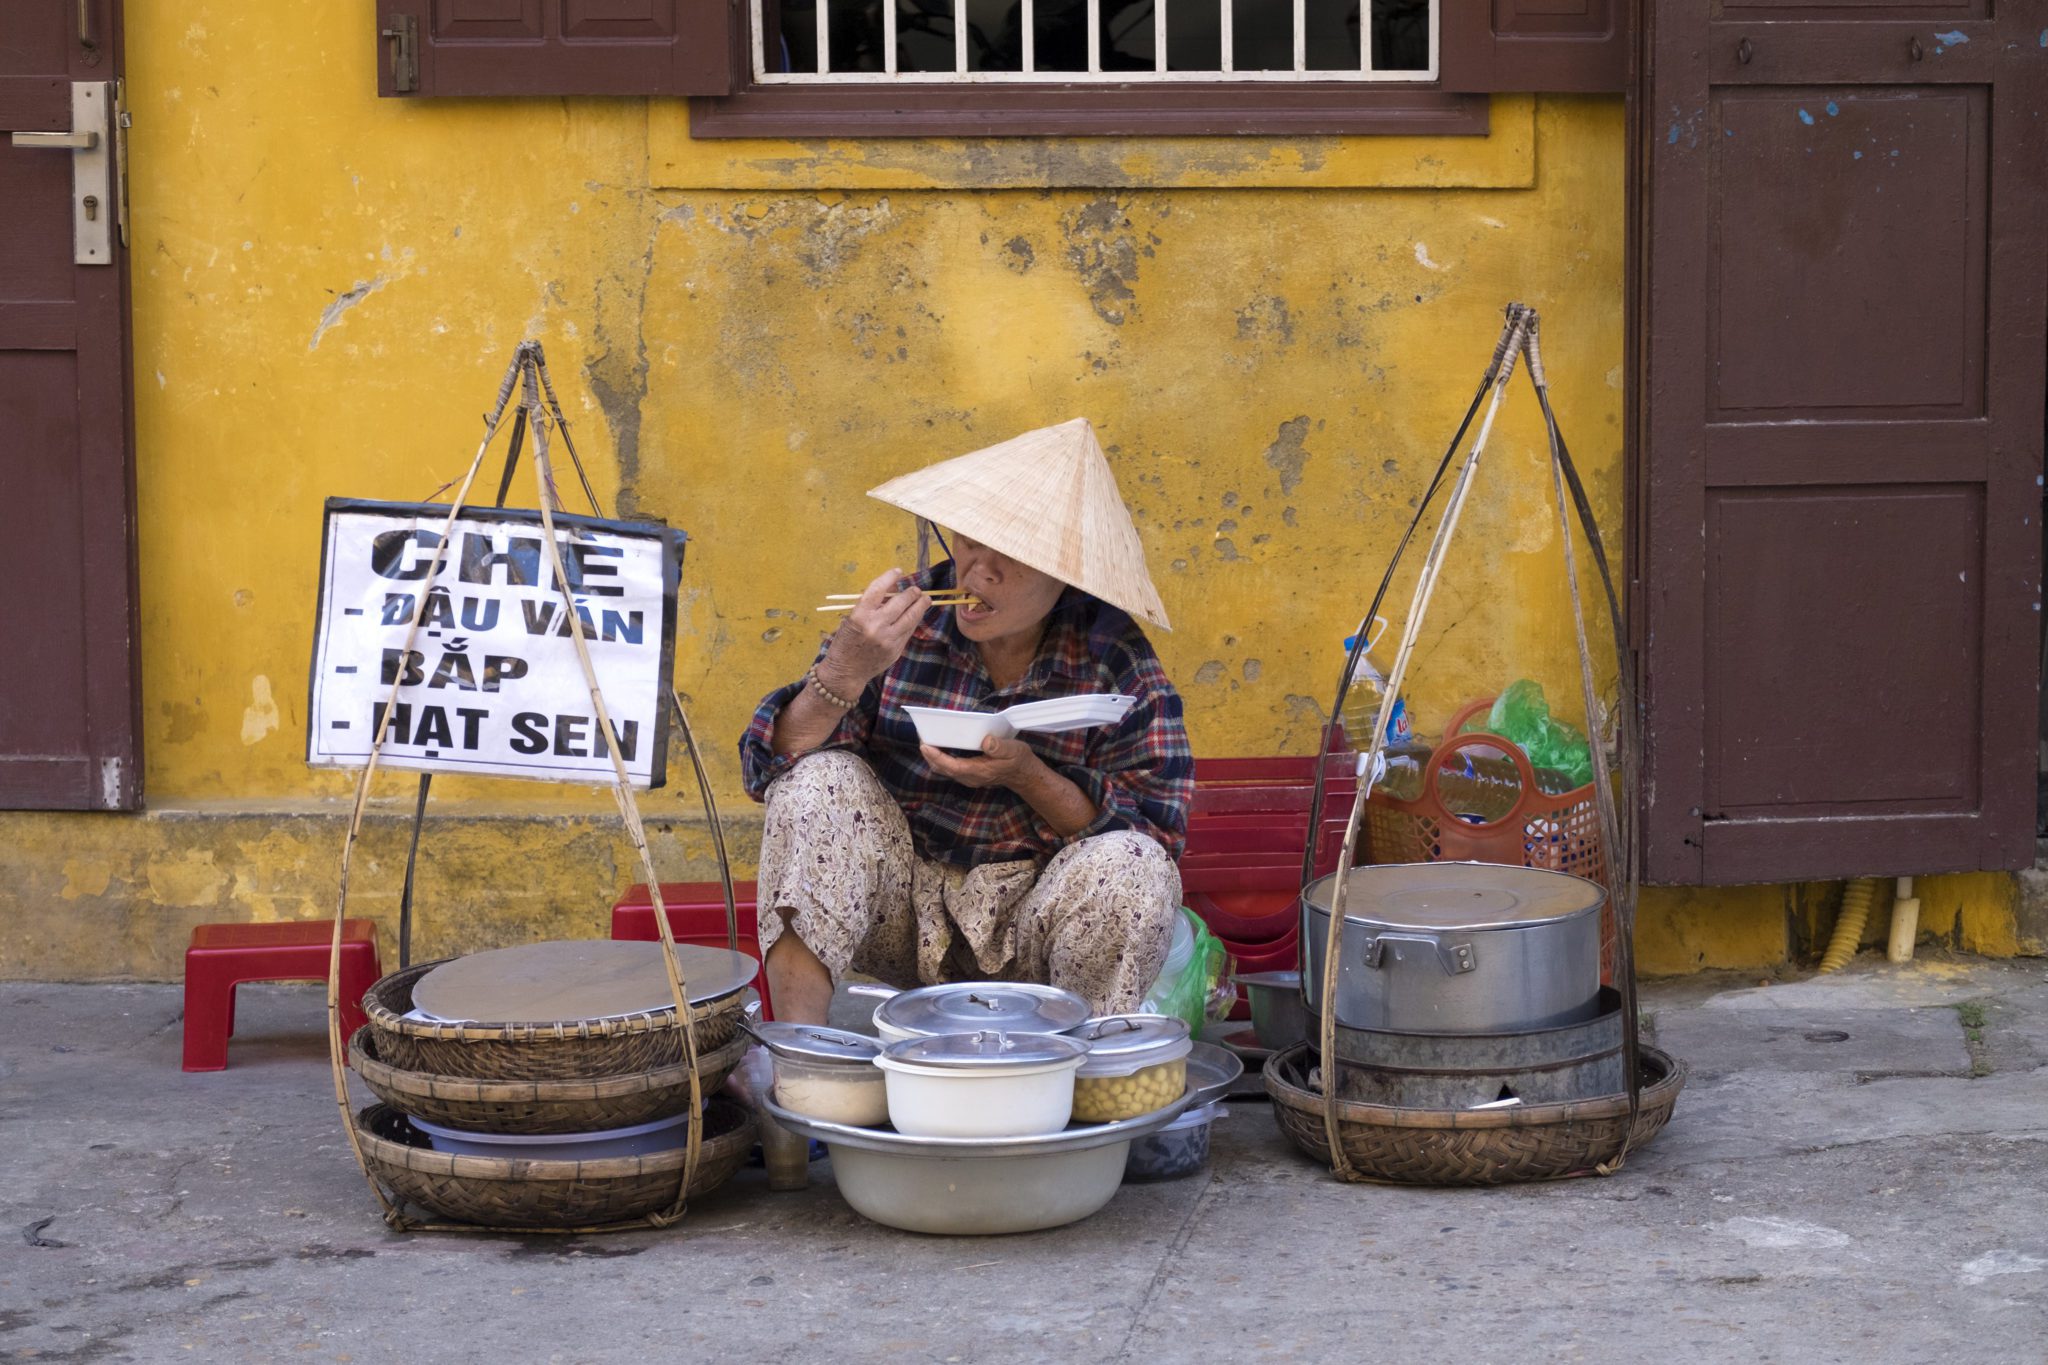 A street vendor eating her lunch in the old quarter of Hoi An, Vietnam